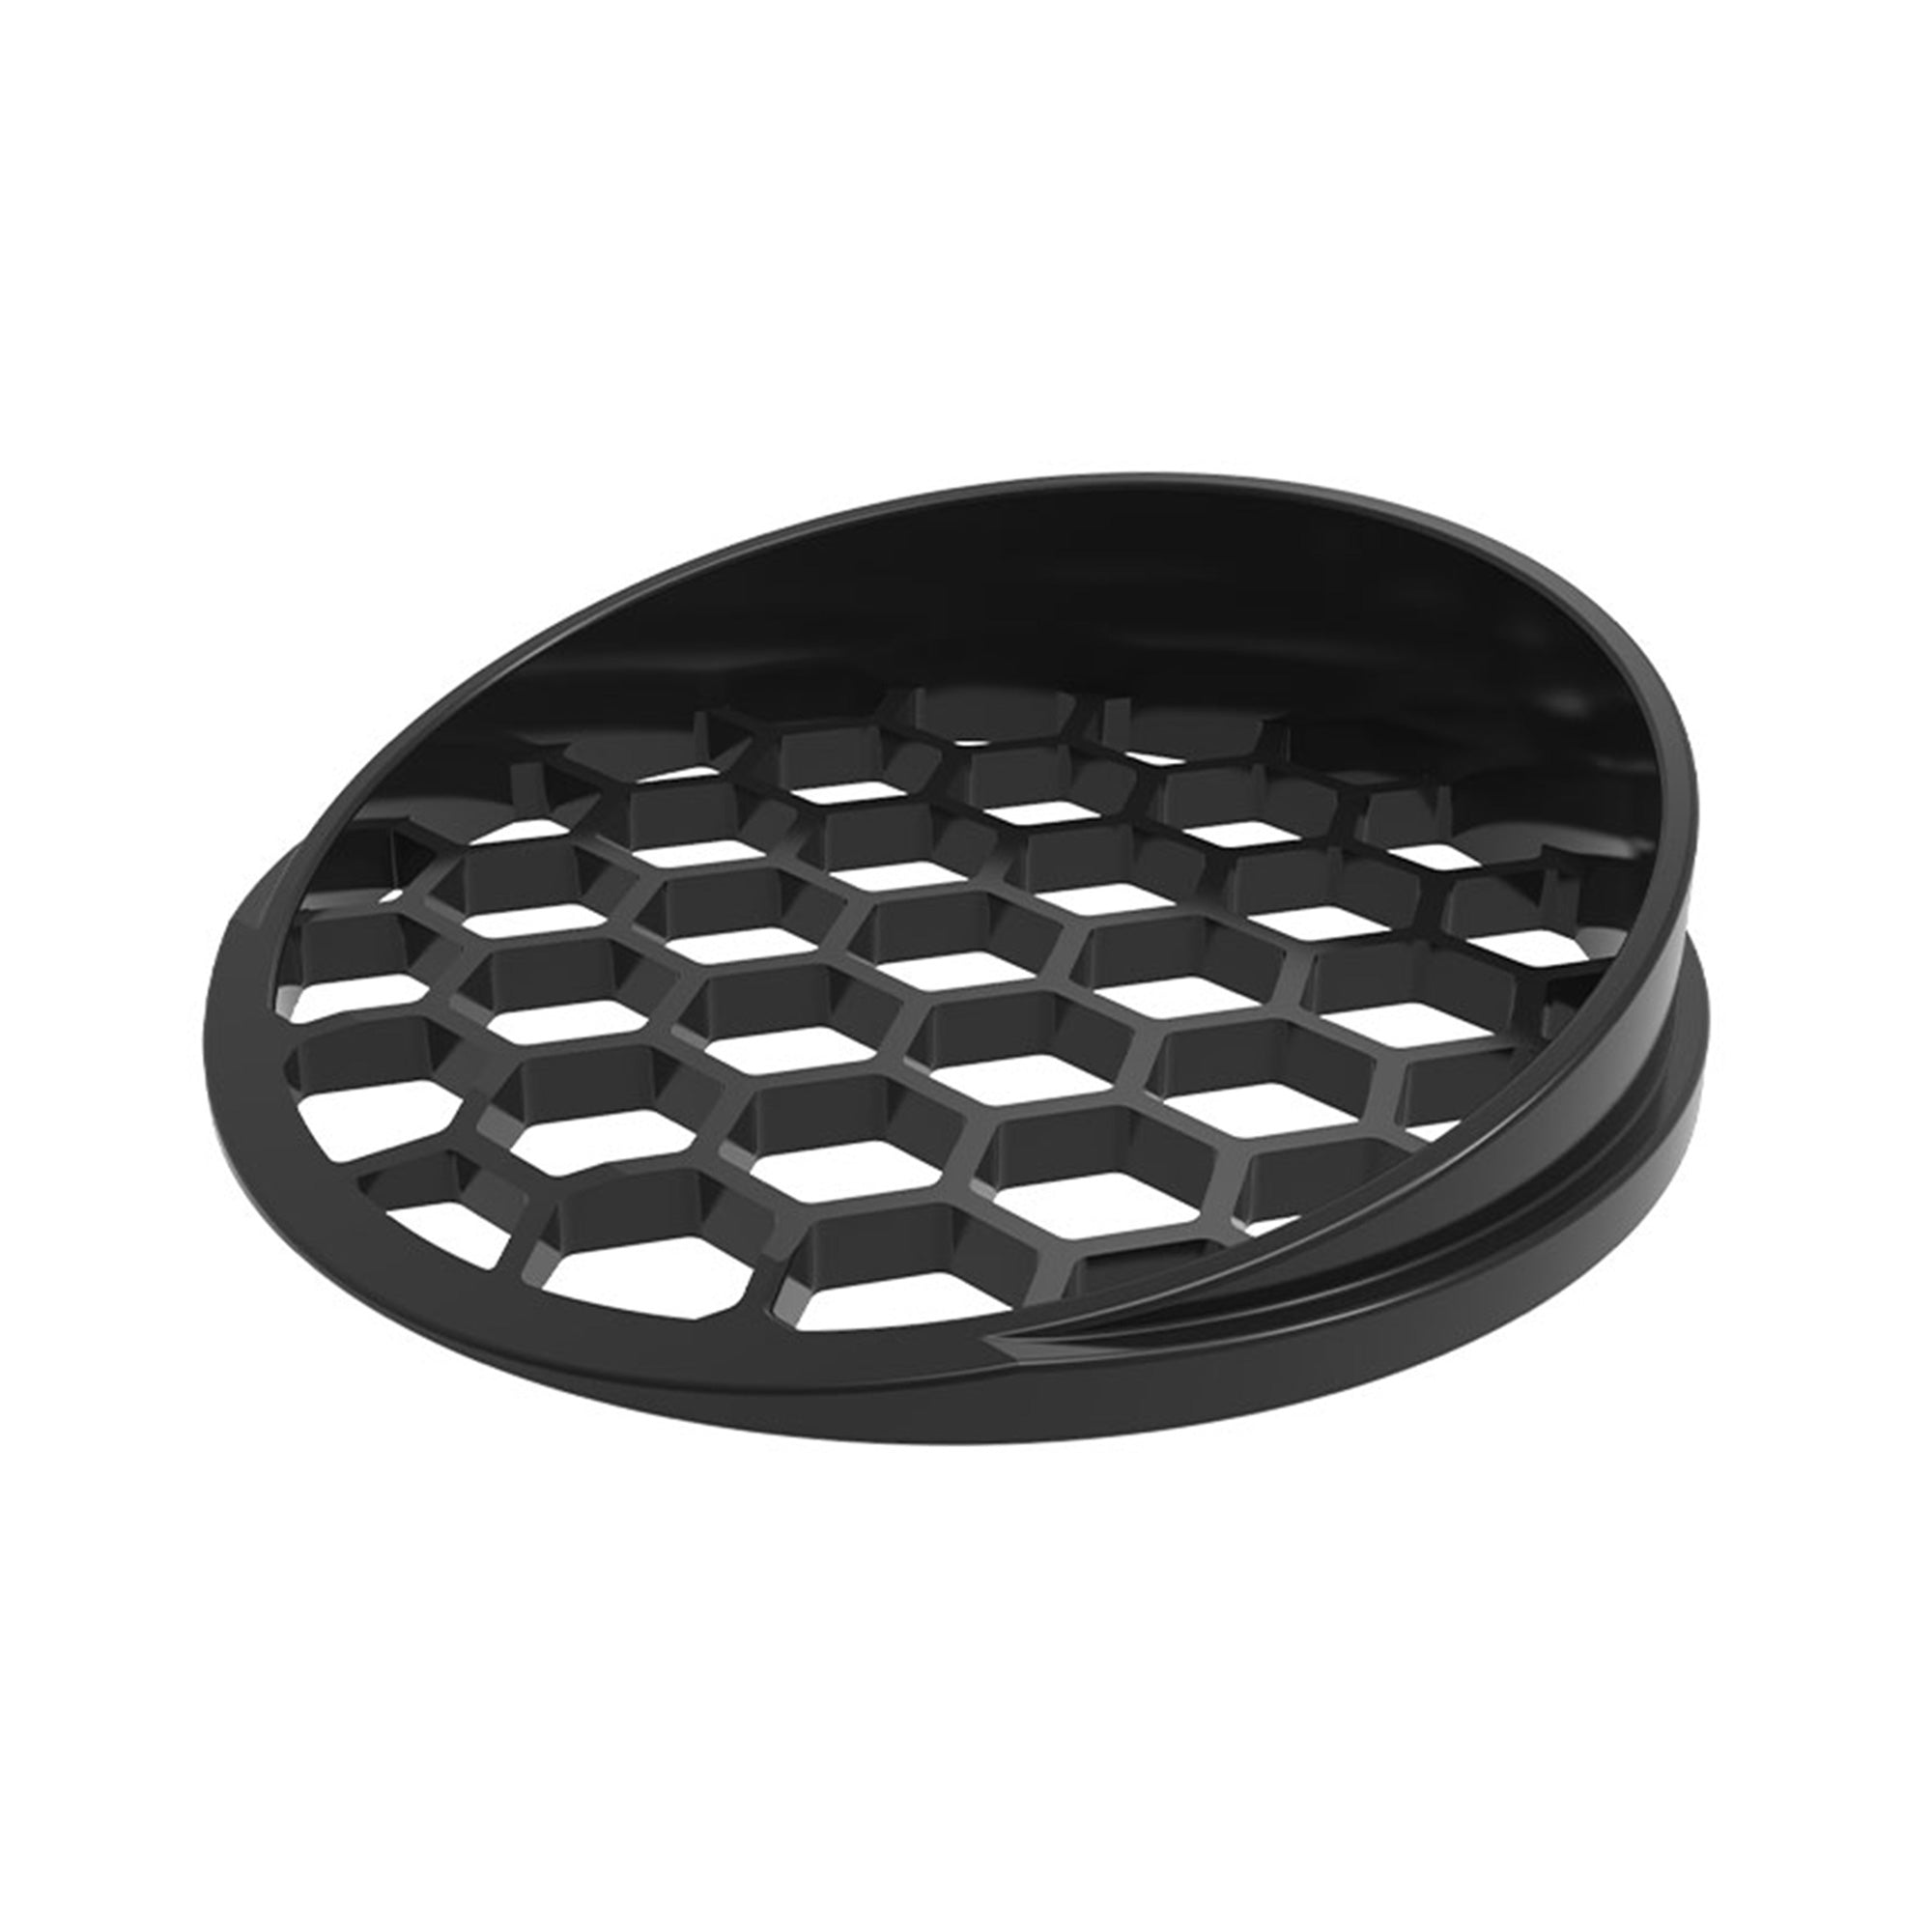 Snap-on Honeycomb Louver Glare Control for WAC Landscape Lighting Grand Accent Light